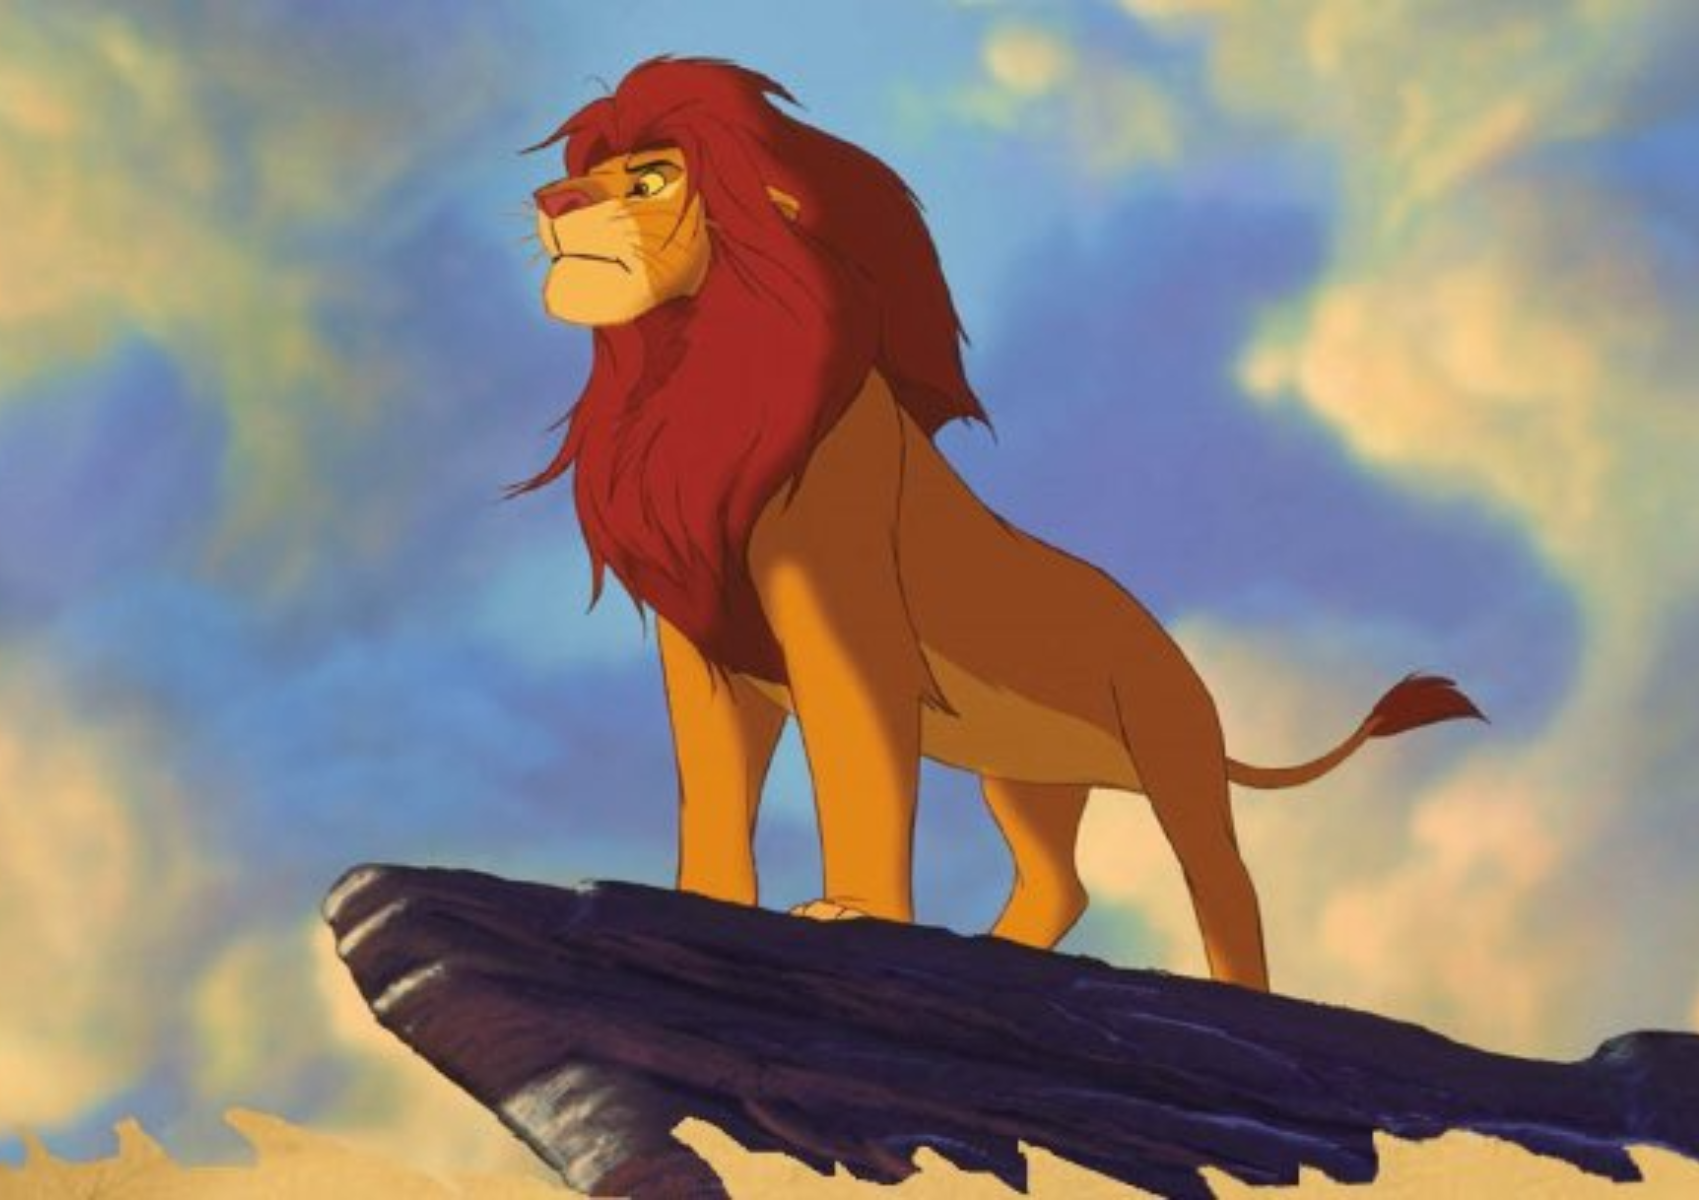 Simba is standing on a suspended rock